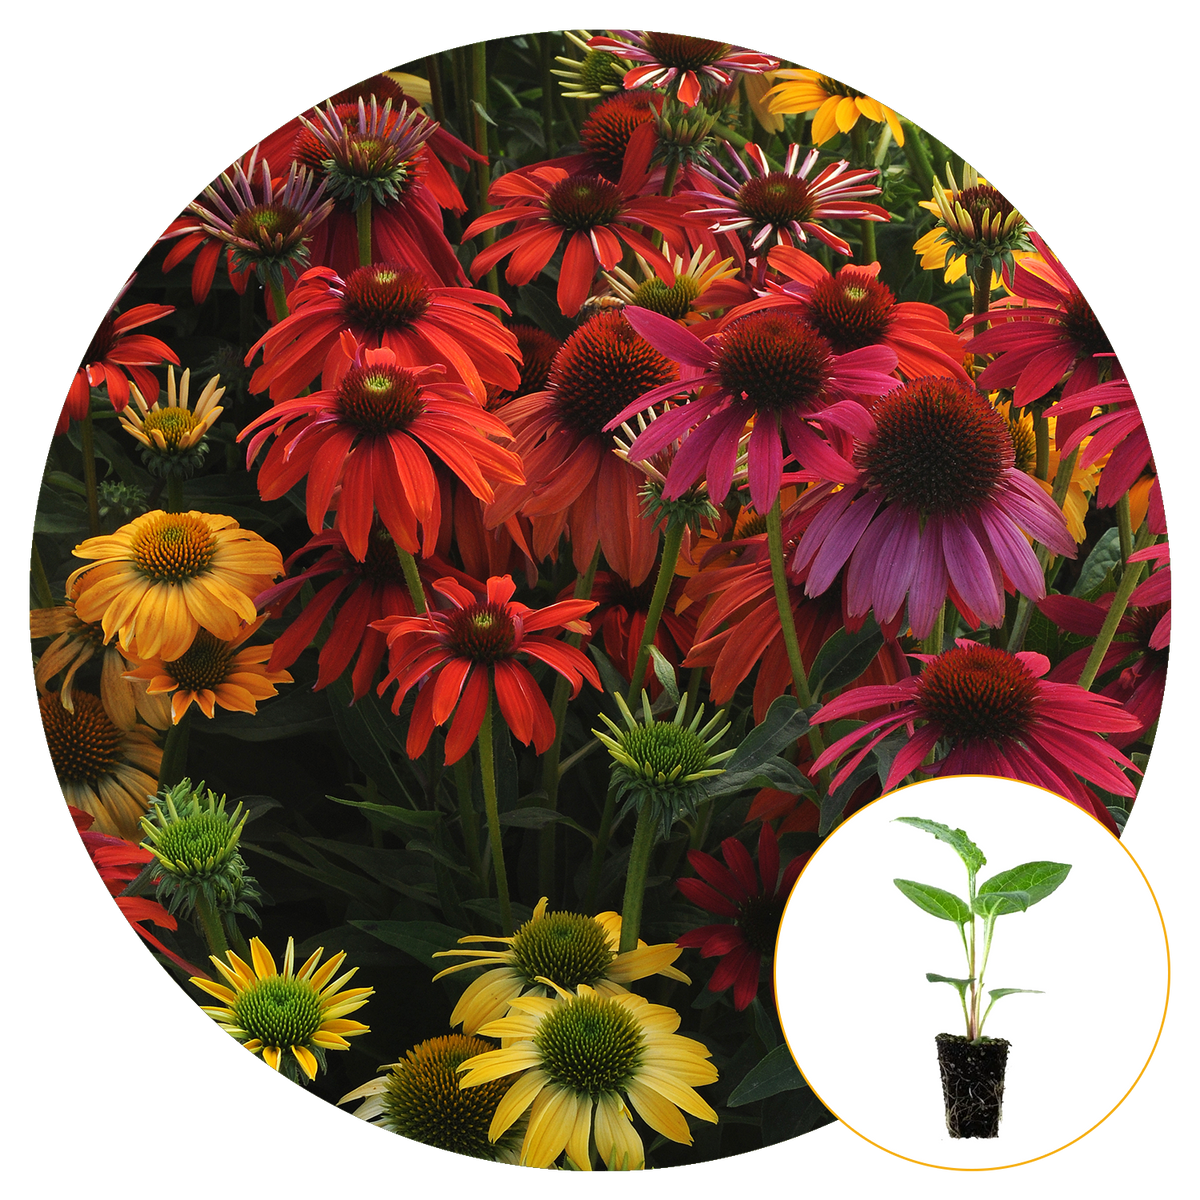 A FIELD OF BLOOMING COLORFUL CONEFLOWER